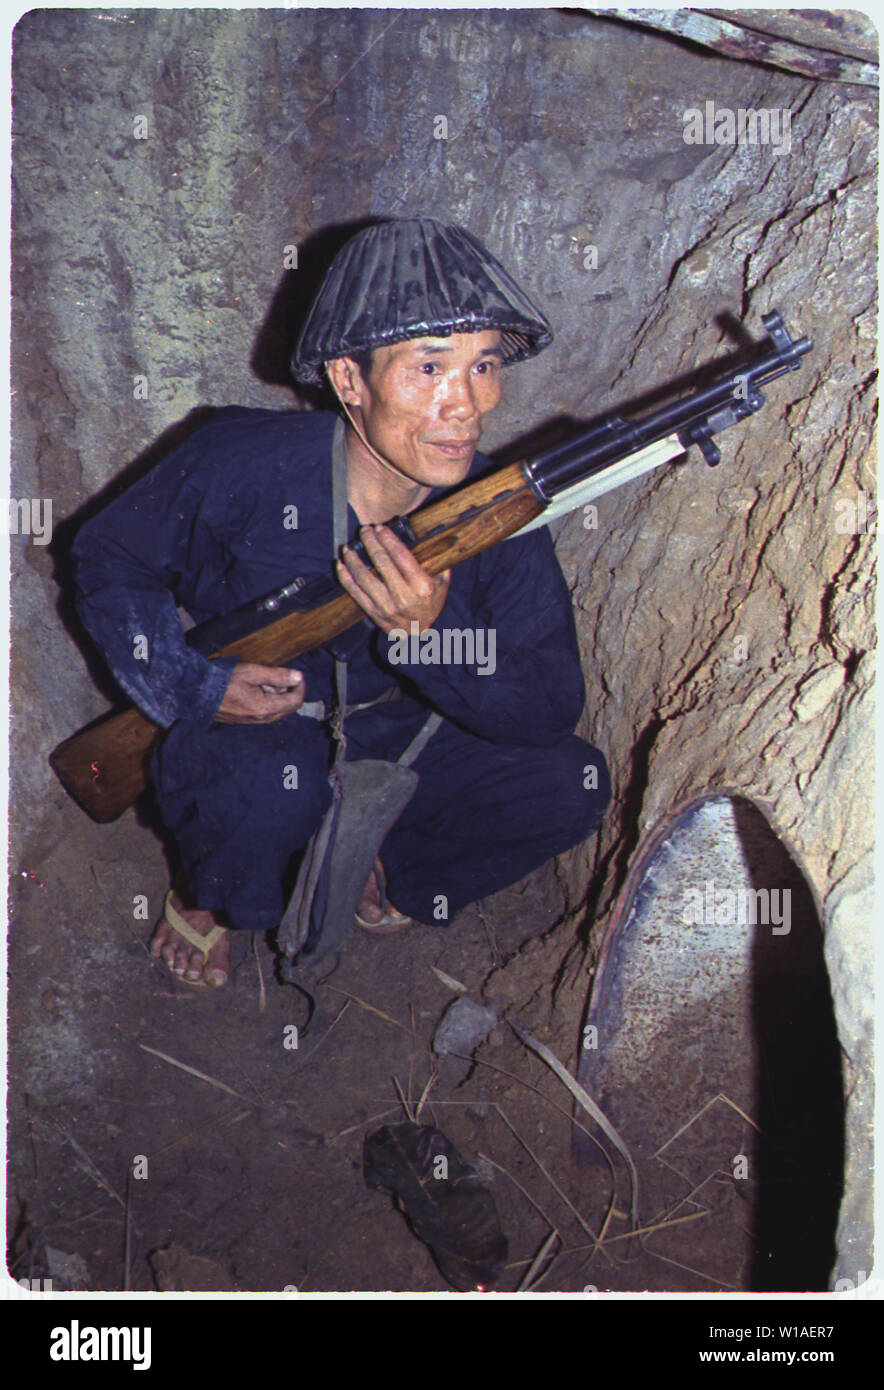 A Viet Cong soldier crouches in a bunker with an SKS rifle. Stock Photo